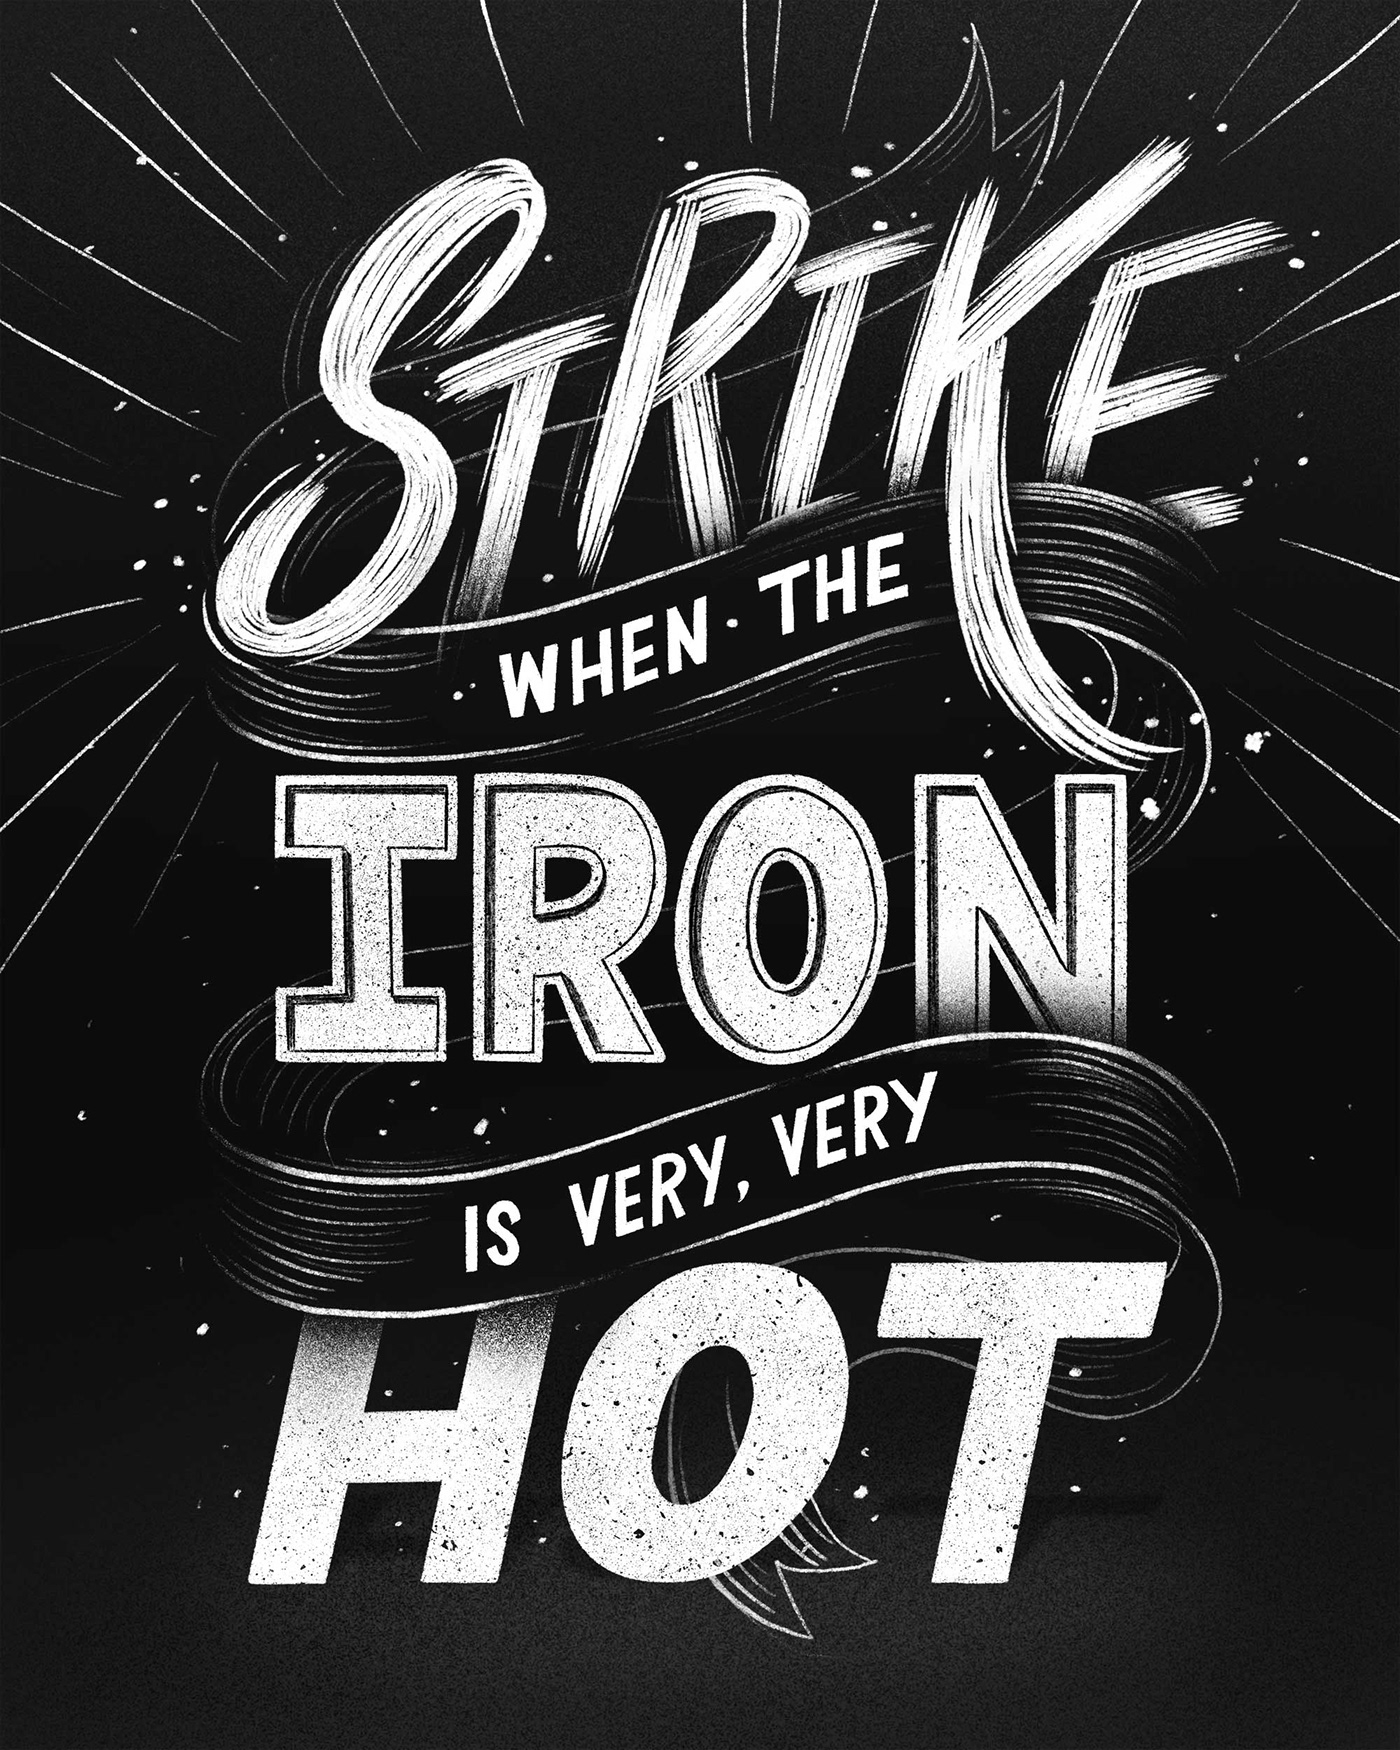 Black and white hand lettering featuring the phrase "Strike when the iron is hot"